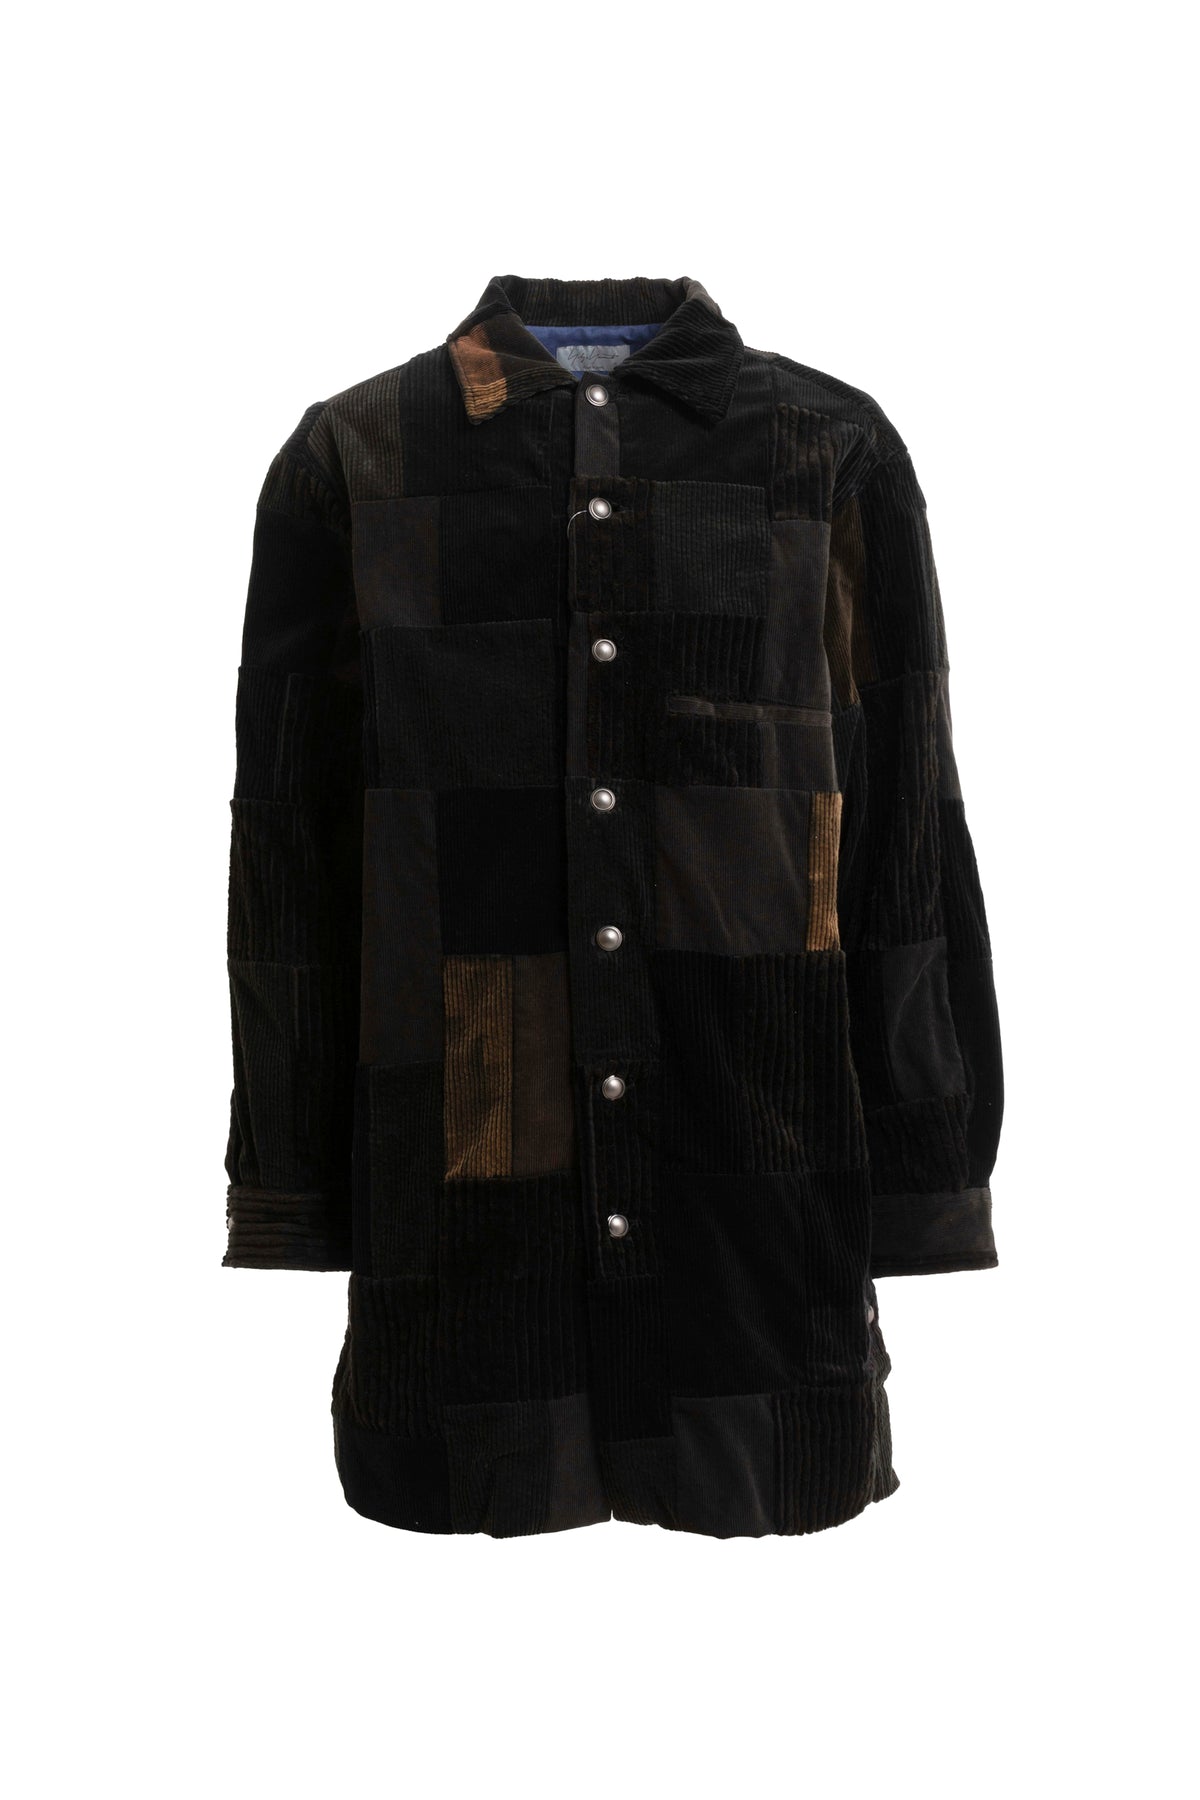 Z-CORDUROY PATCHED SHIRT / BRW